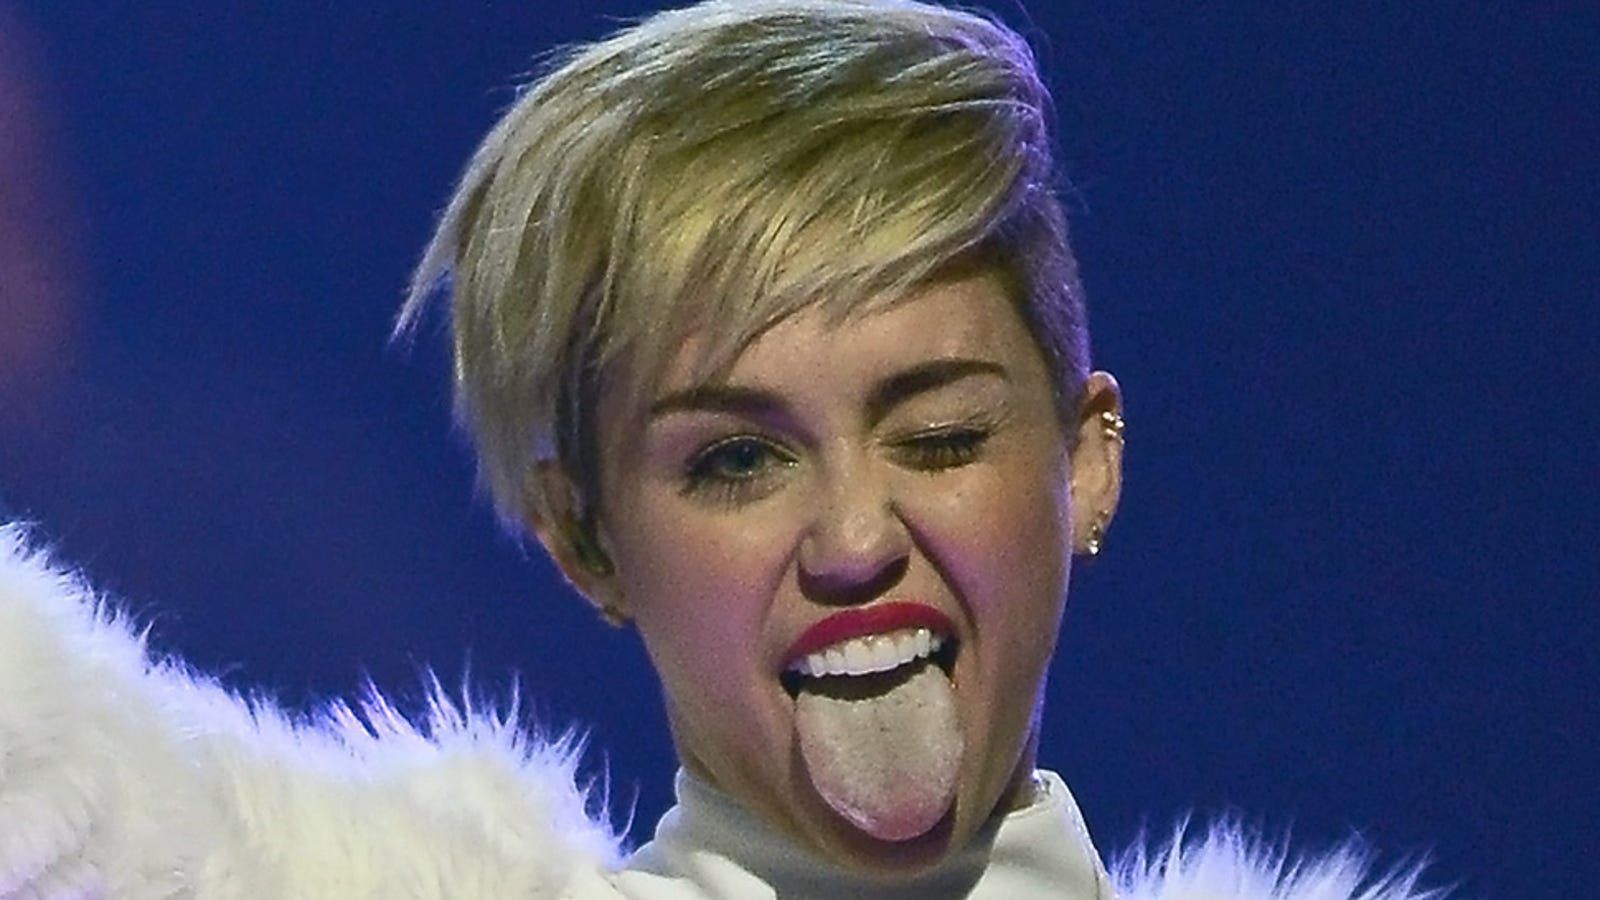 Miley Cyrus Tongue Is Now The Star Of A Porn Film Festival